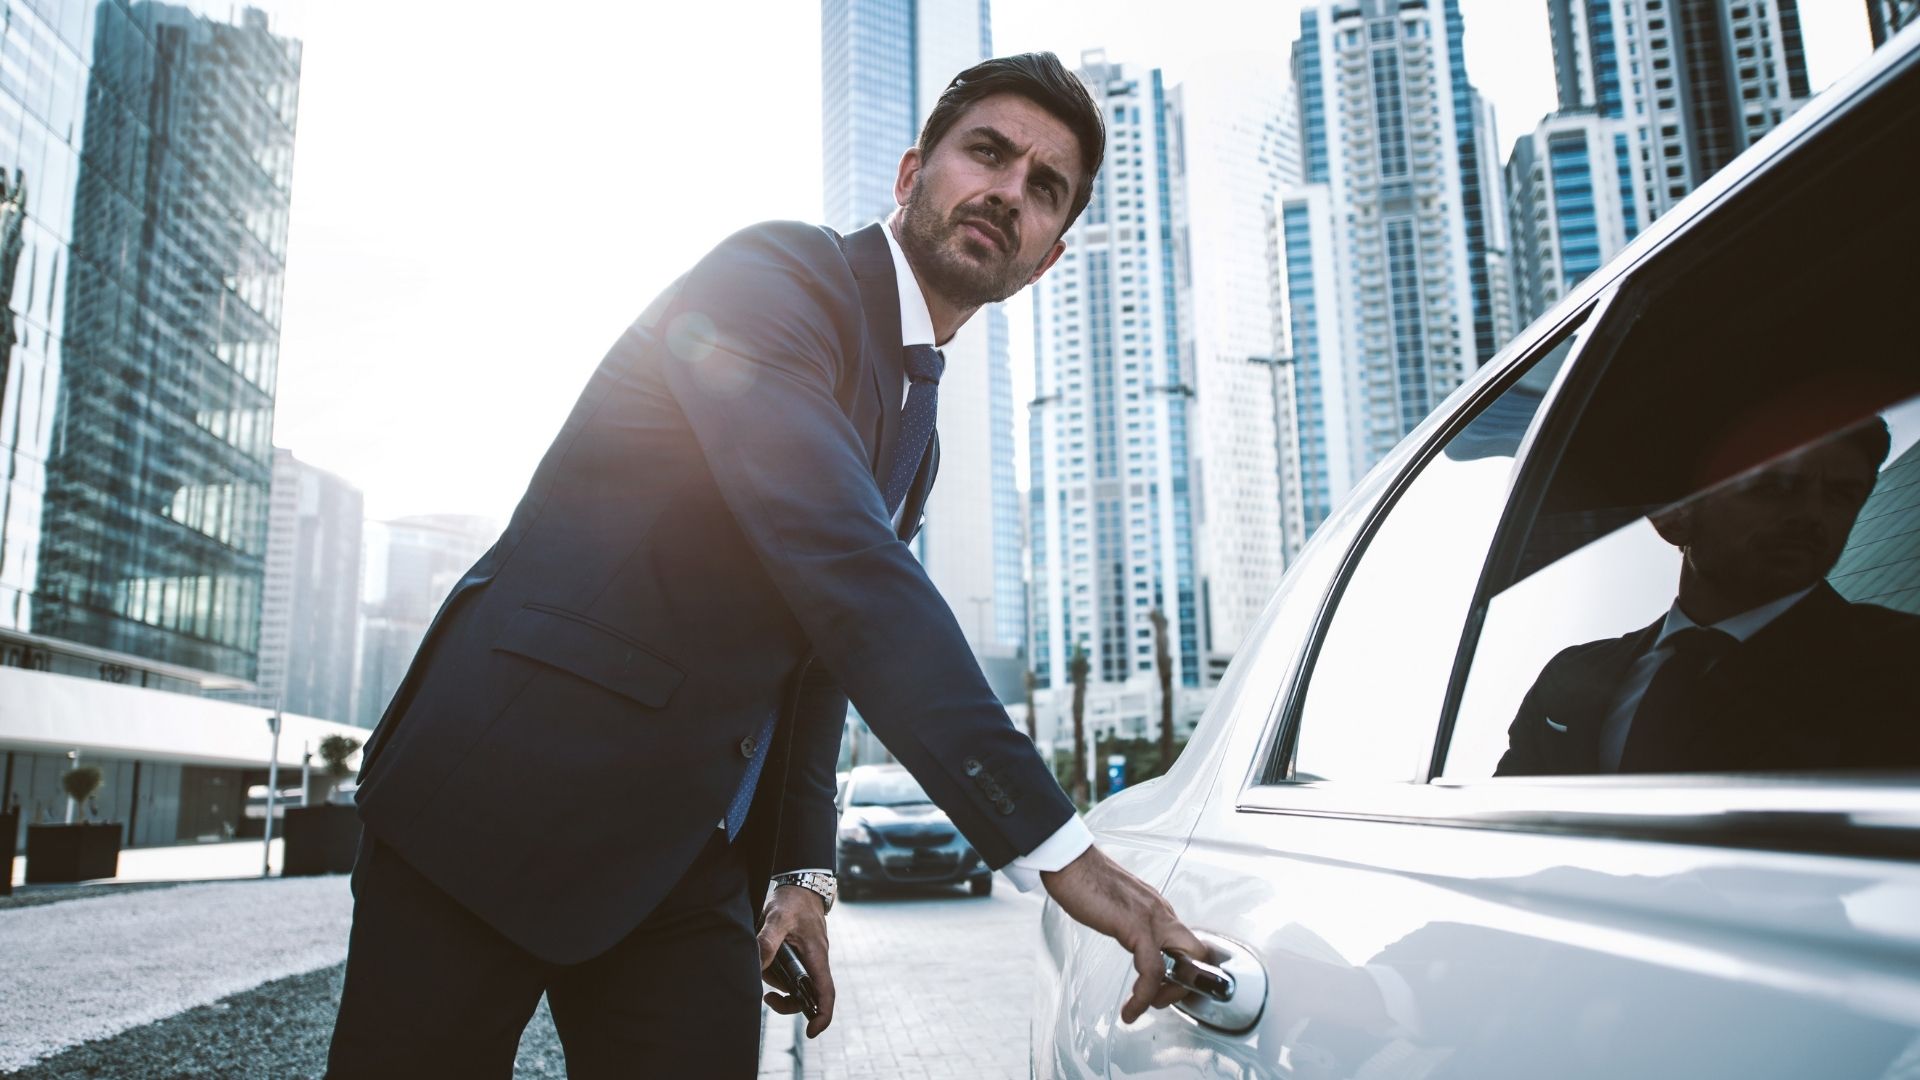 Five compelling reasons to hire a limousine